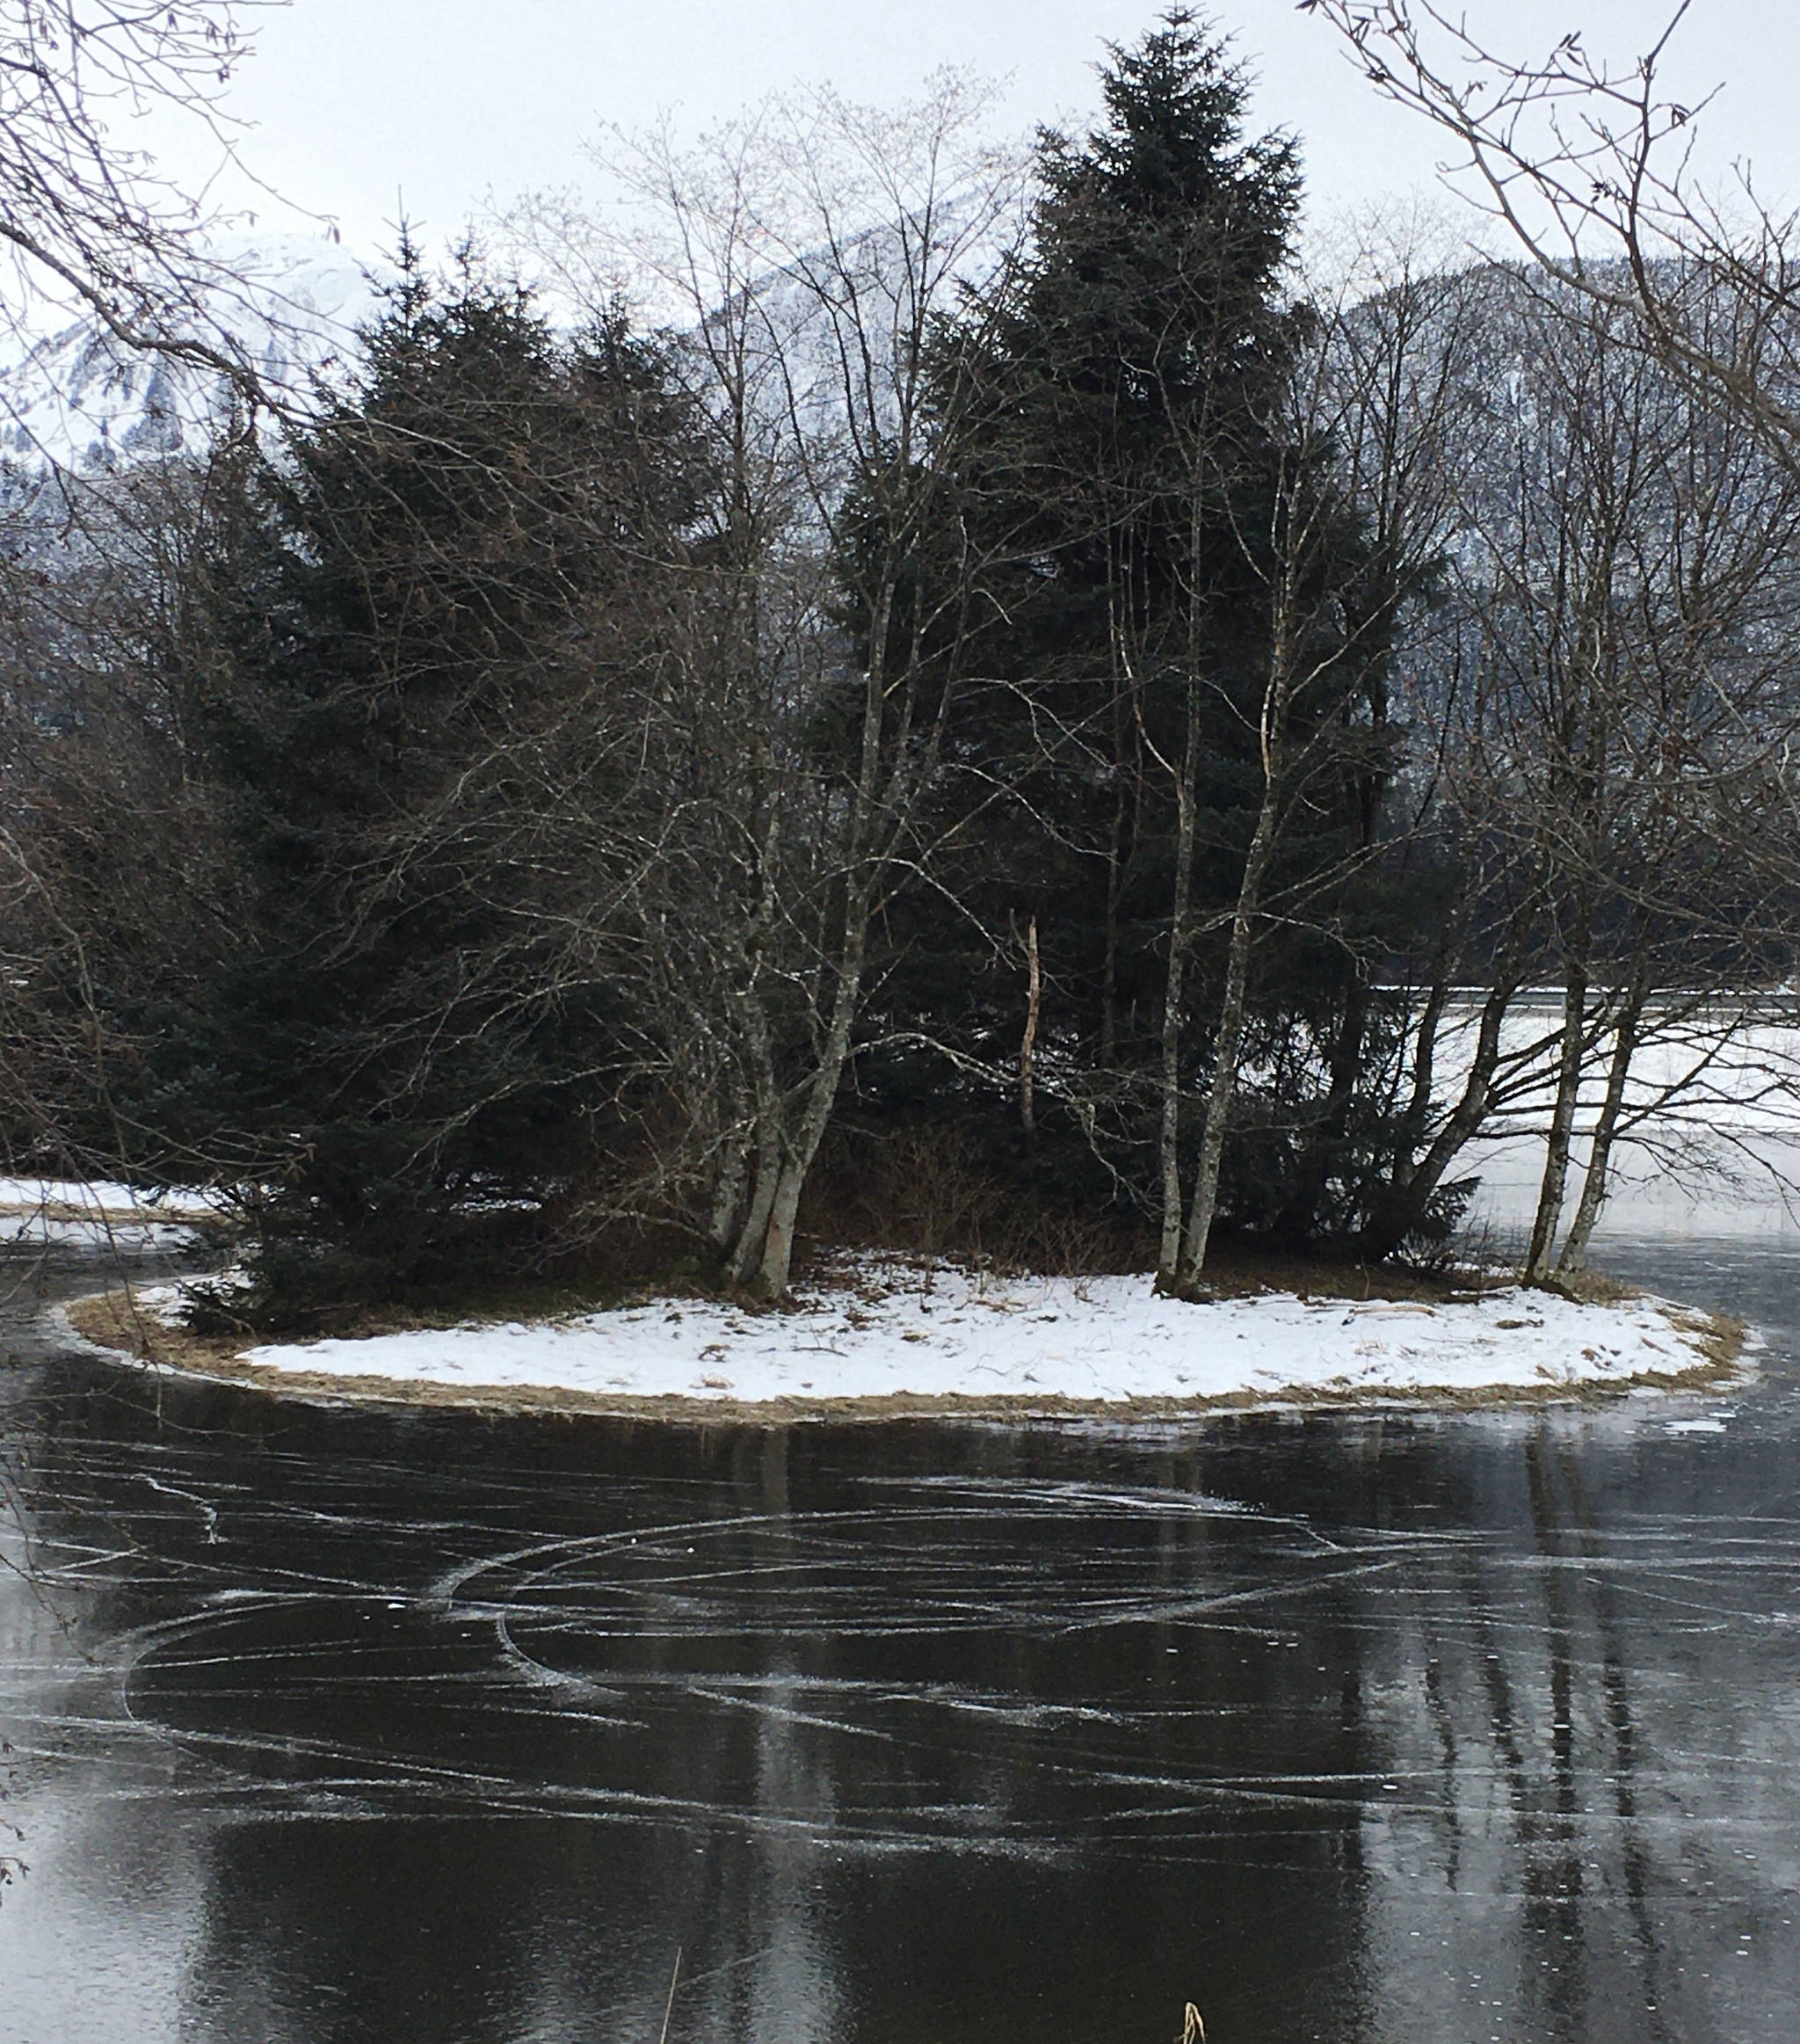 This photo shows an ice-locked tree on Twin Lakes and the ice skaters’ tracks on Jan. 28. (Courtesy Photo /Barbara Belknap)